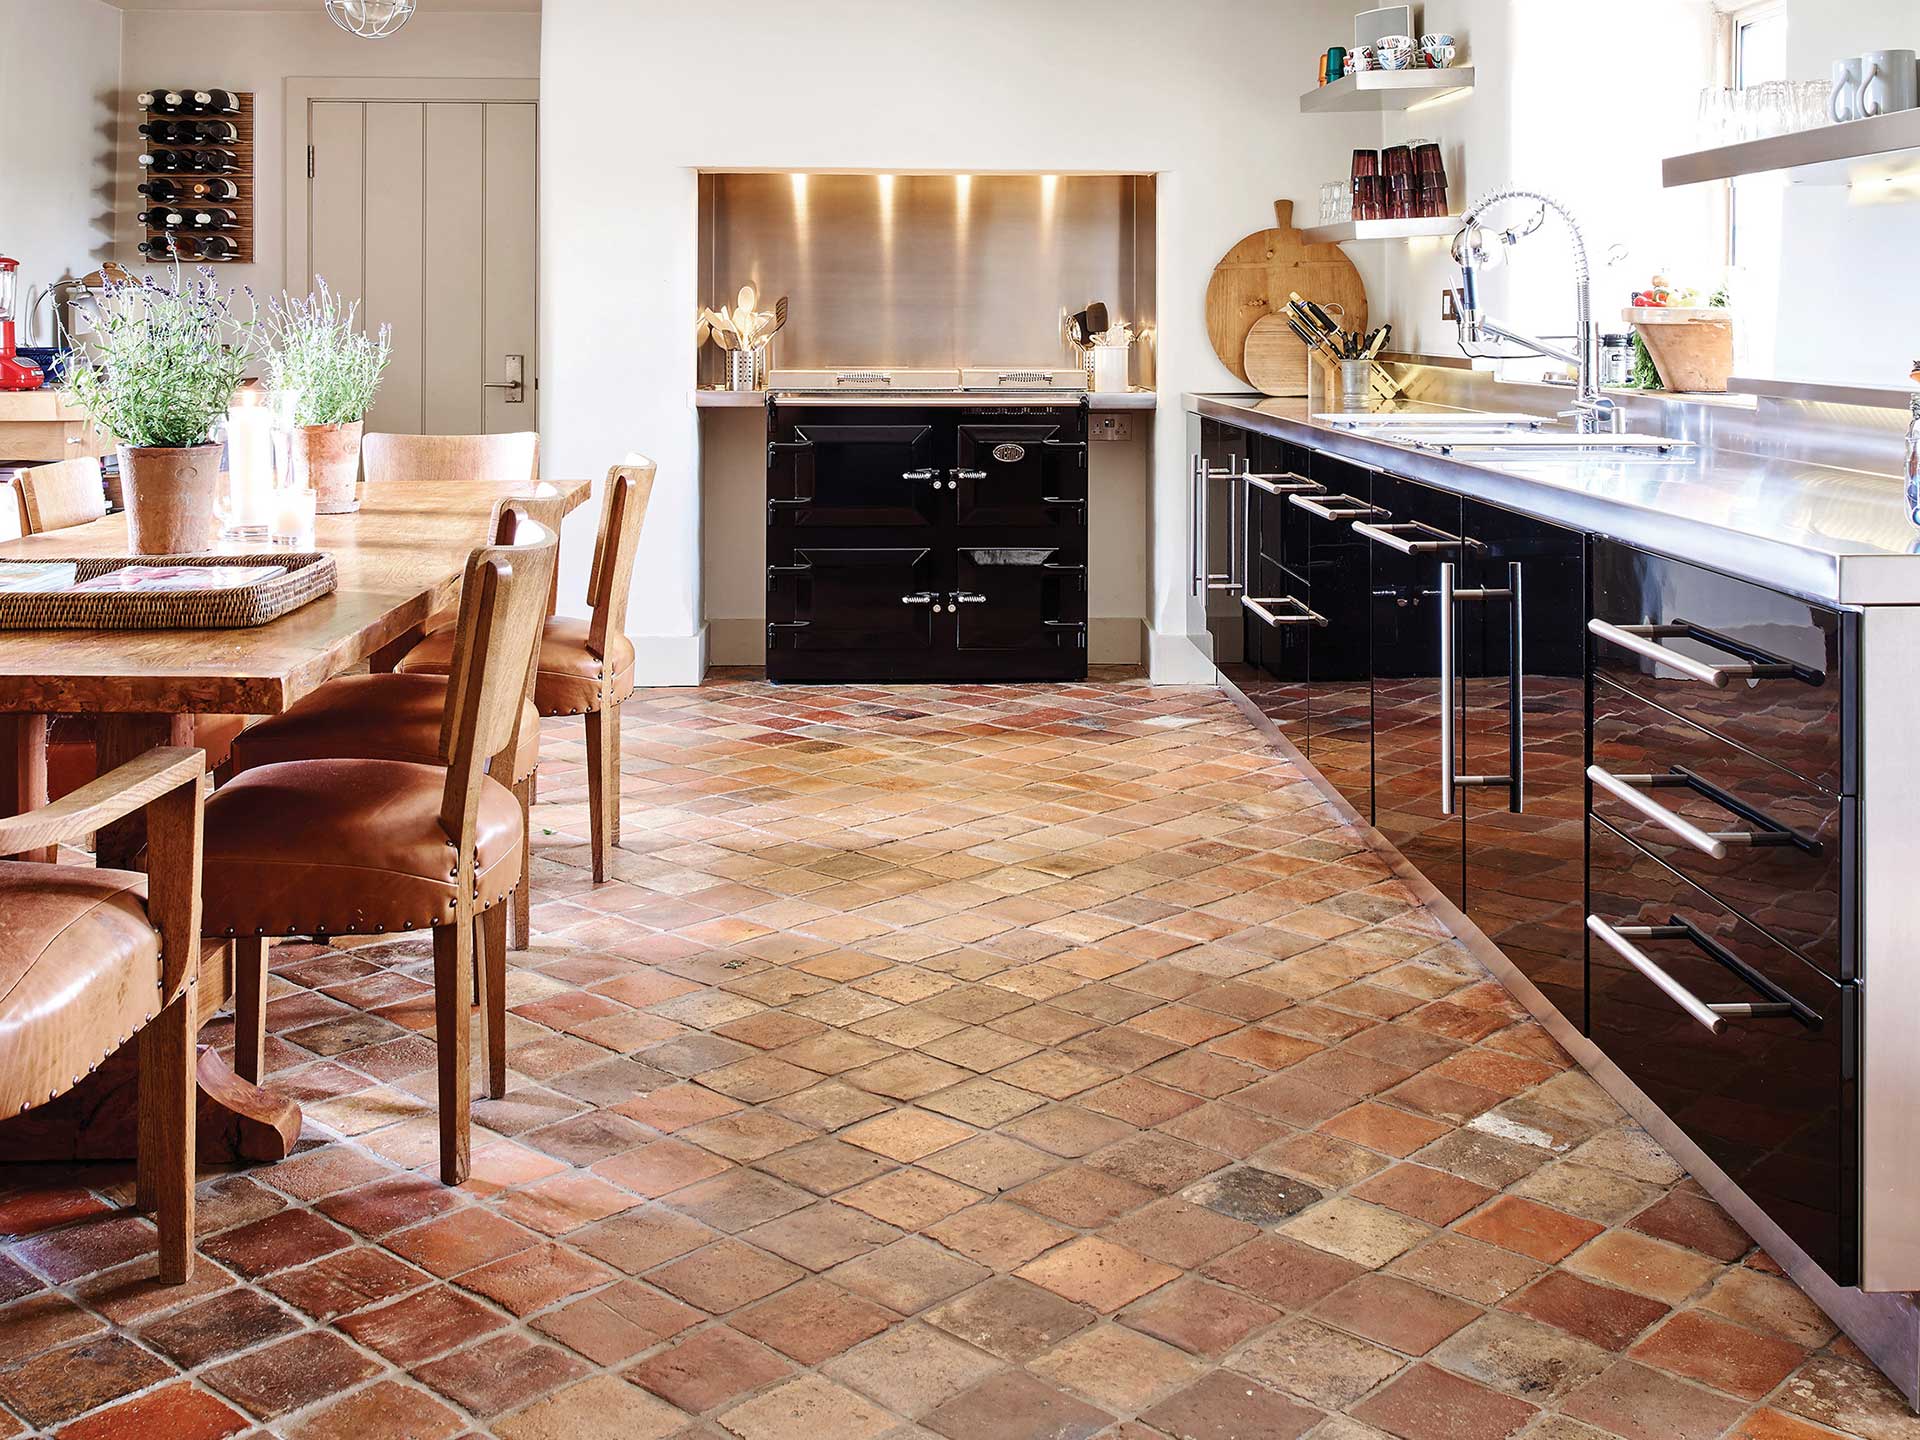 Classic Victorian tiling with a terracotta finish